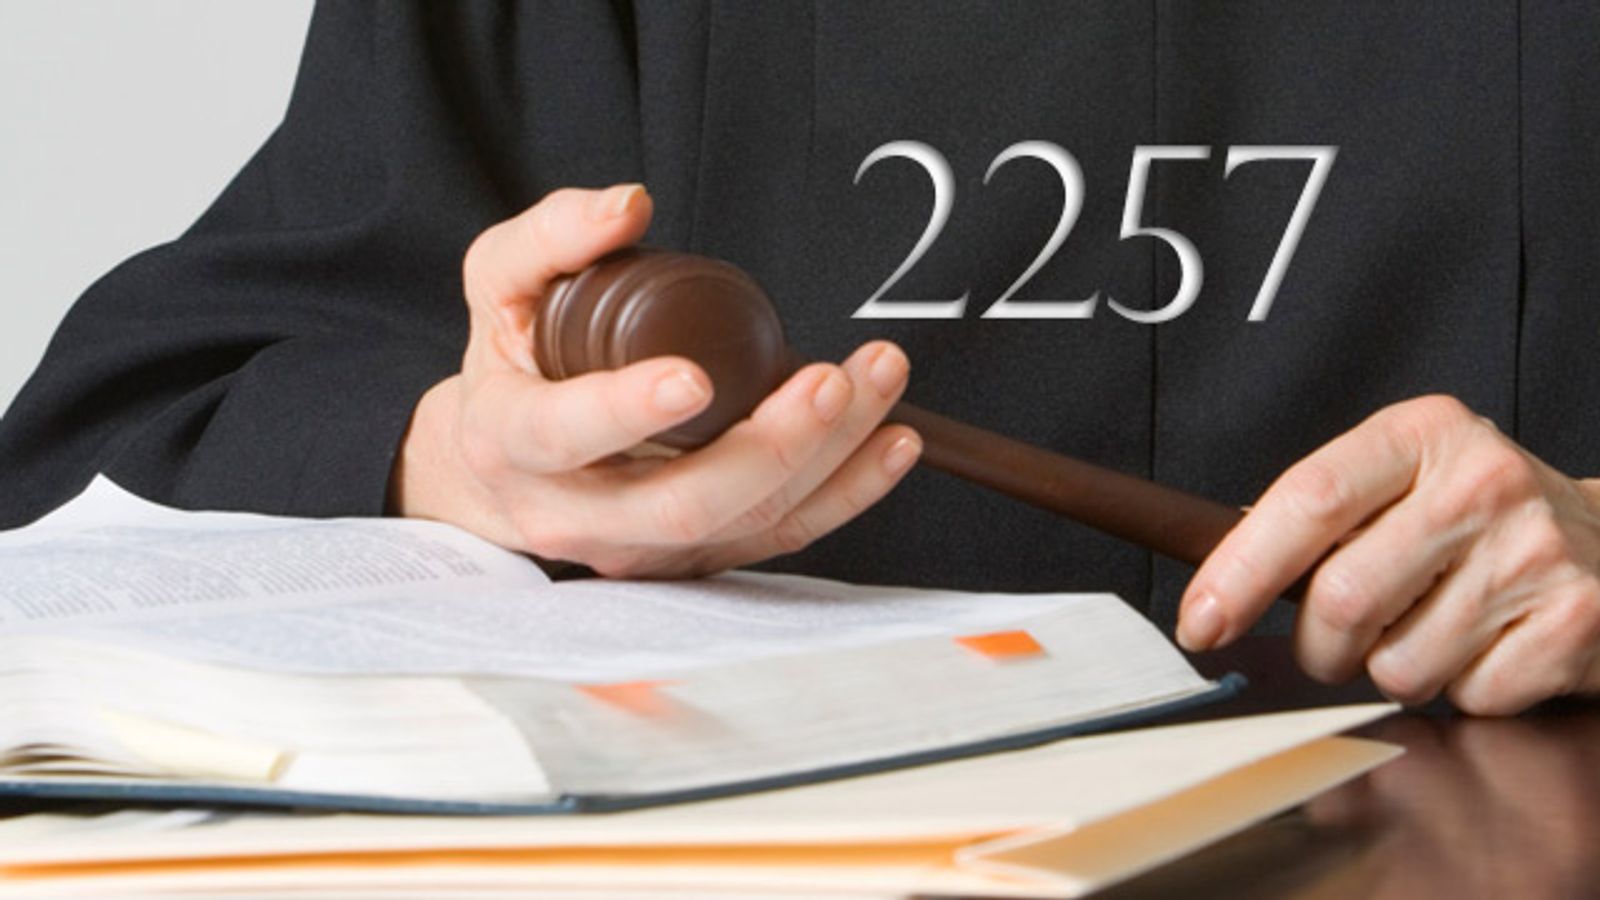 2257 Plaintiffs Petition 3rd Circuit to Respond to Government Brief